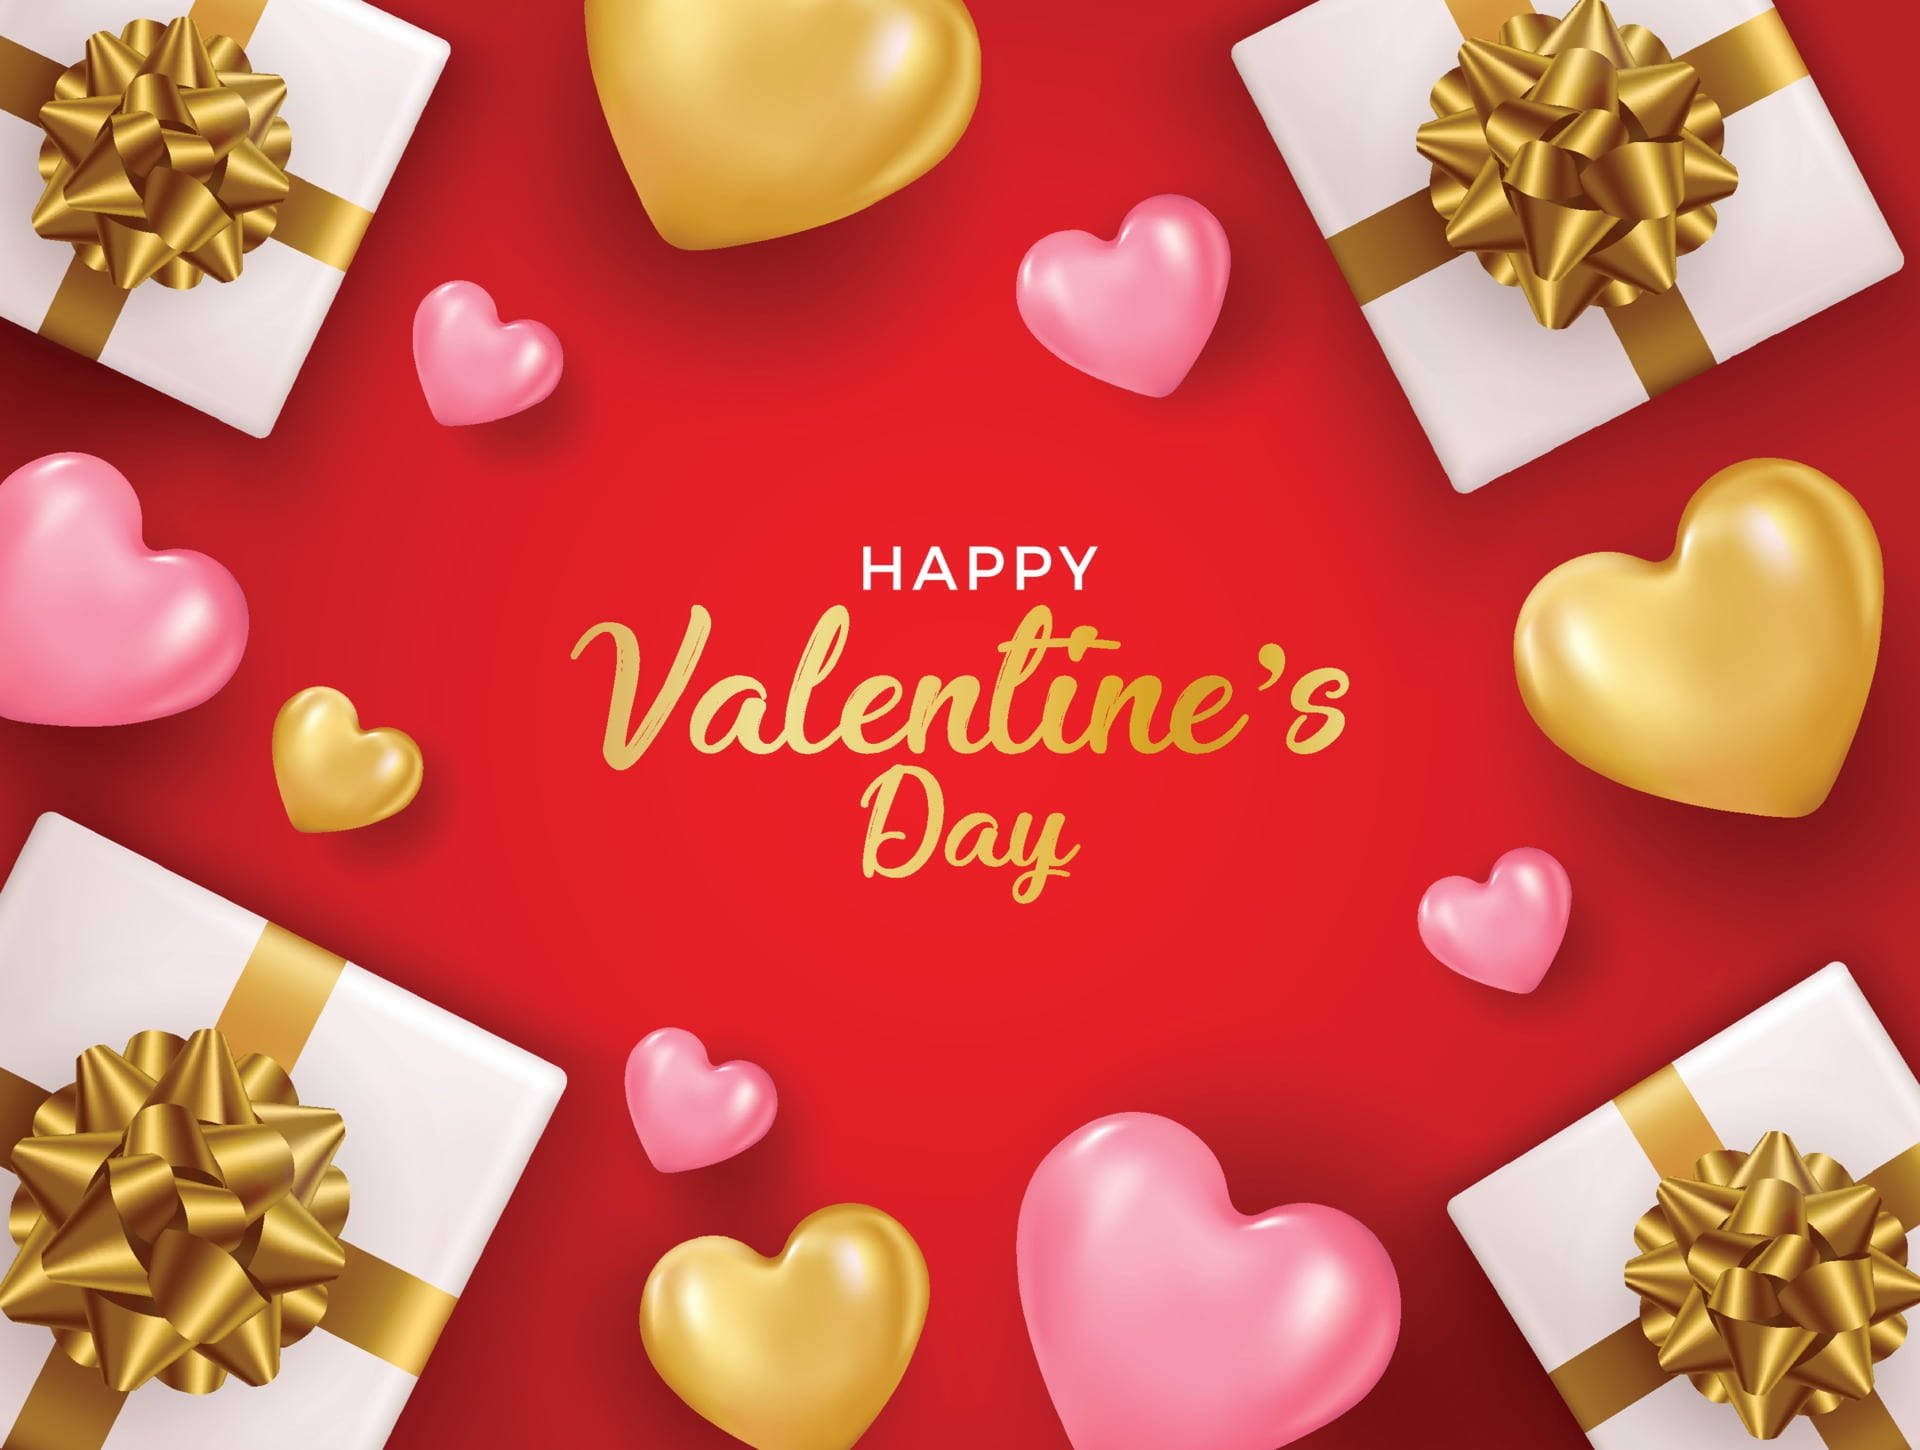 Happy Valentine’s Day Gold Gifts Background